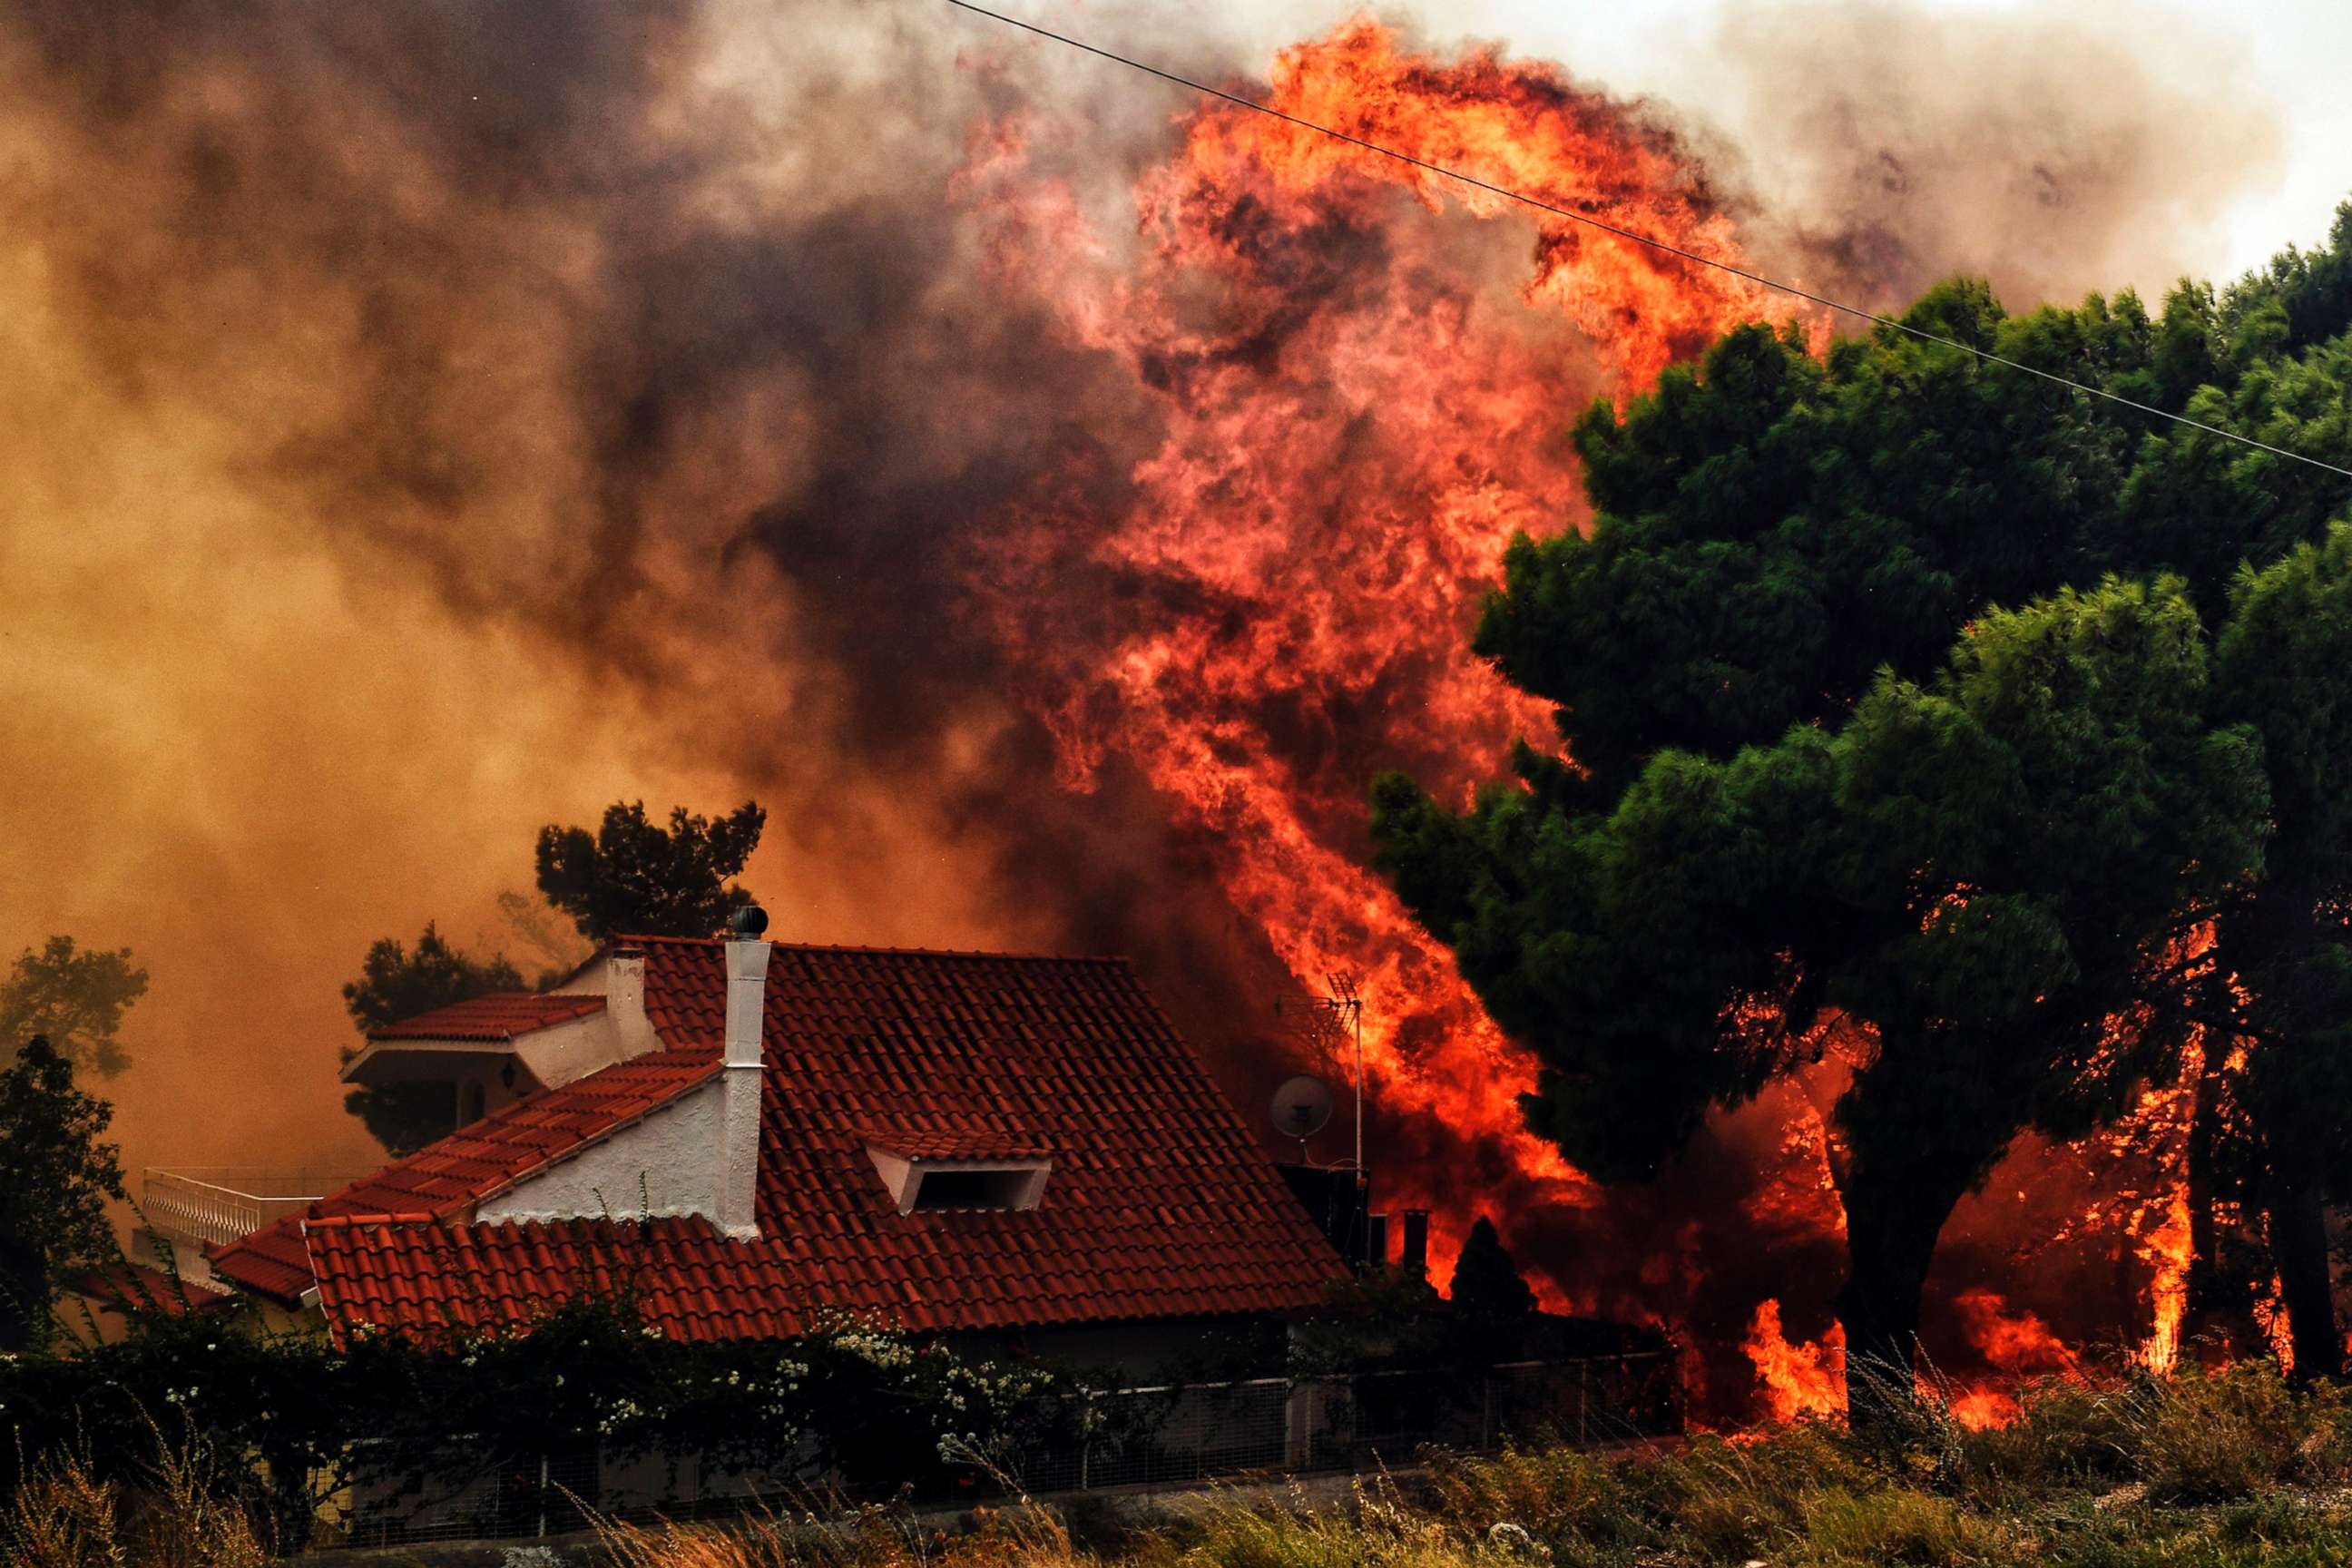 PHOTO: A house is threatened by a huge blaze during a wildfire in Kineta, near Athens, on July 23, 2018.